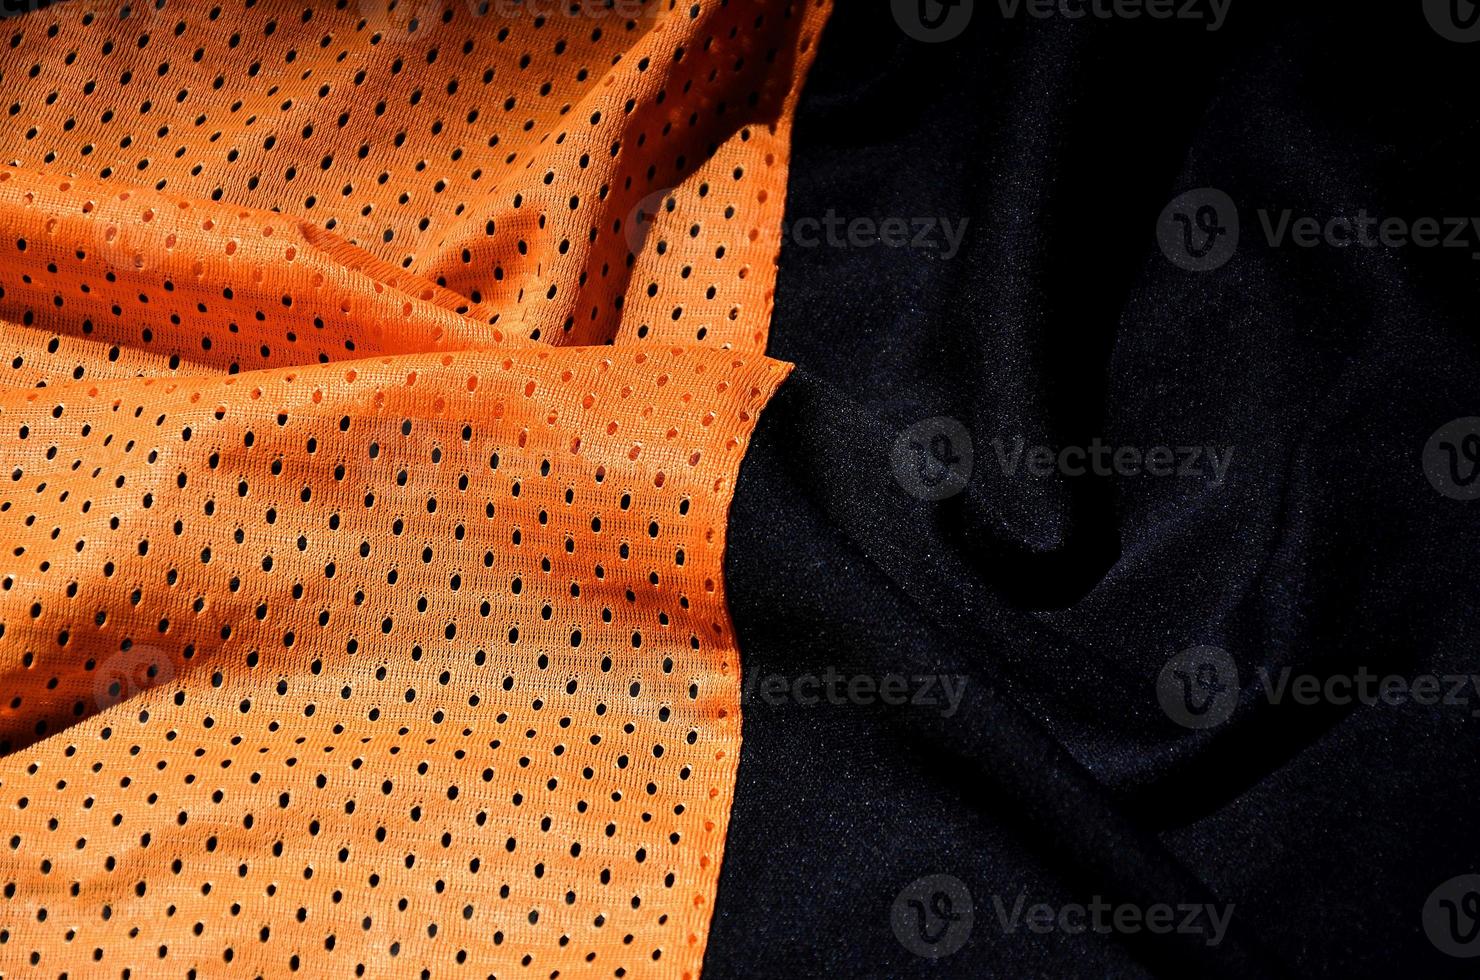 Sport clothing fabric texture background, top view of orange cloth textile surface photo